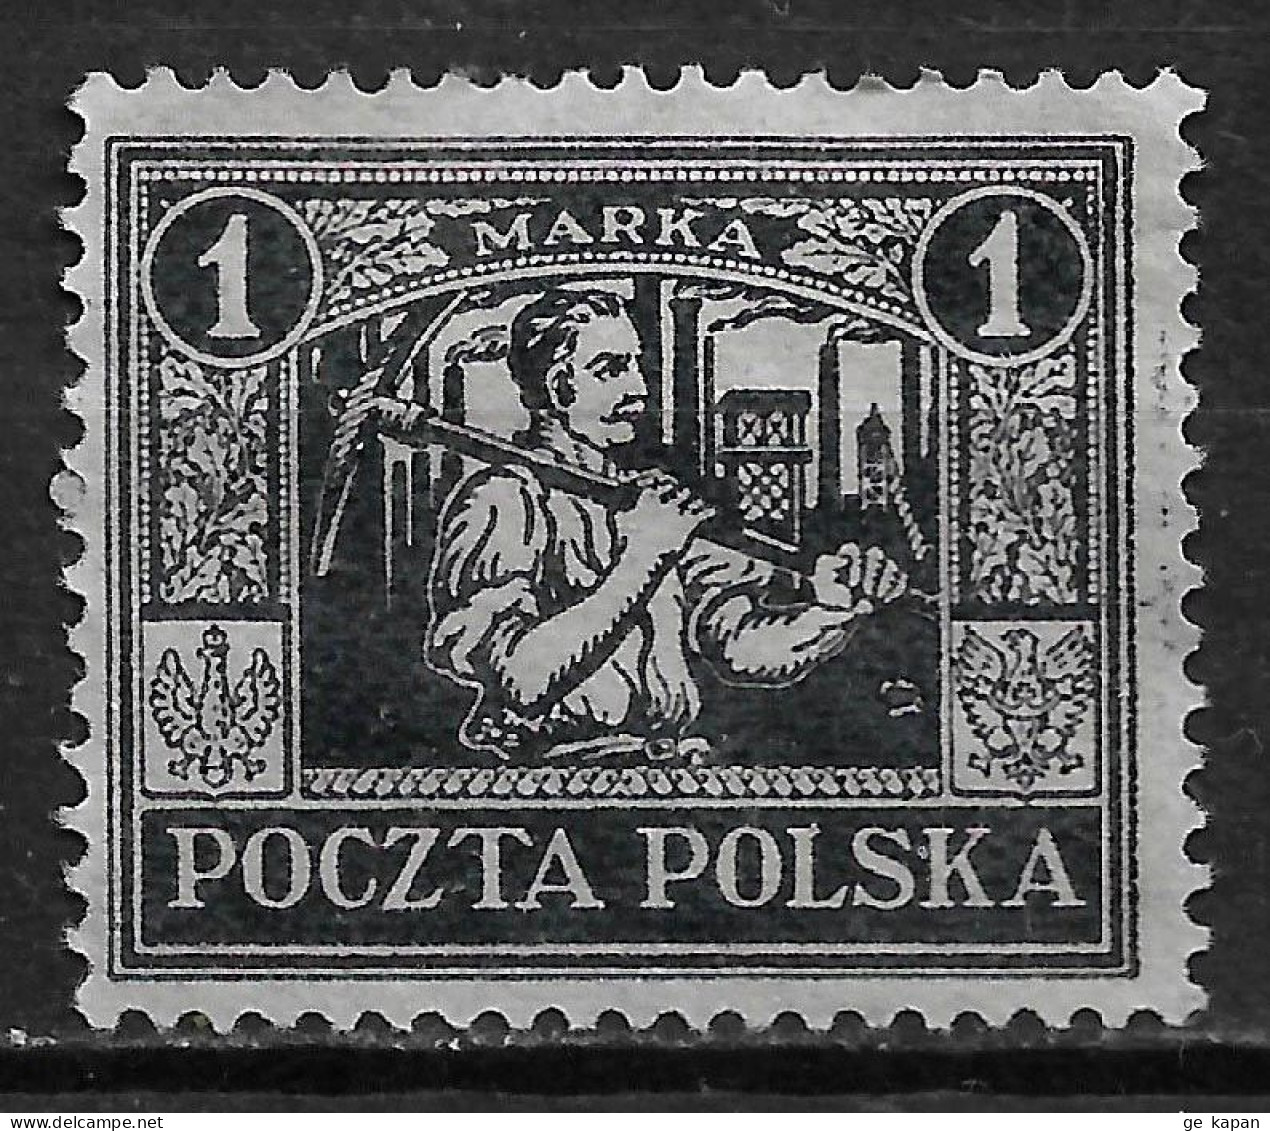 1922 POLAND / Union Of Upper Silesia With Poland MNG Stamp (Scott # 176) Rotary Press On Thin Paper, Perf.12½ - Neufs